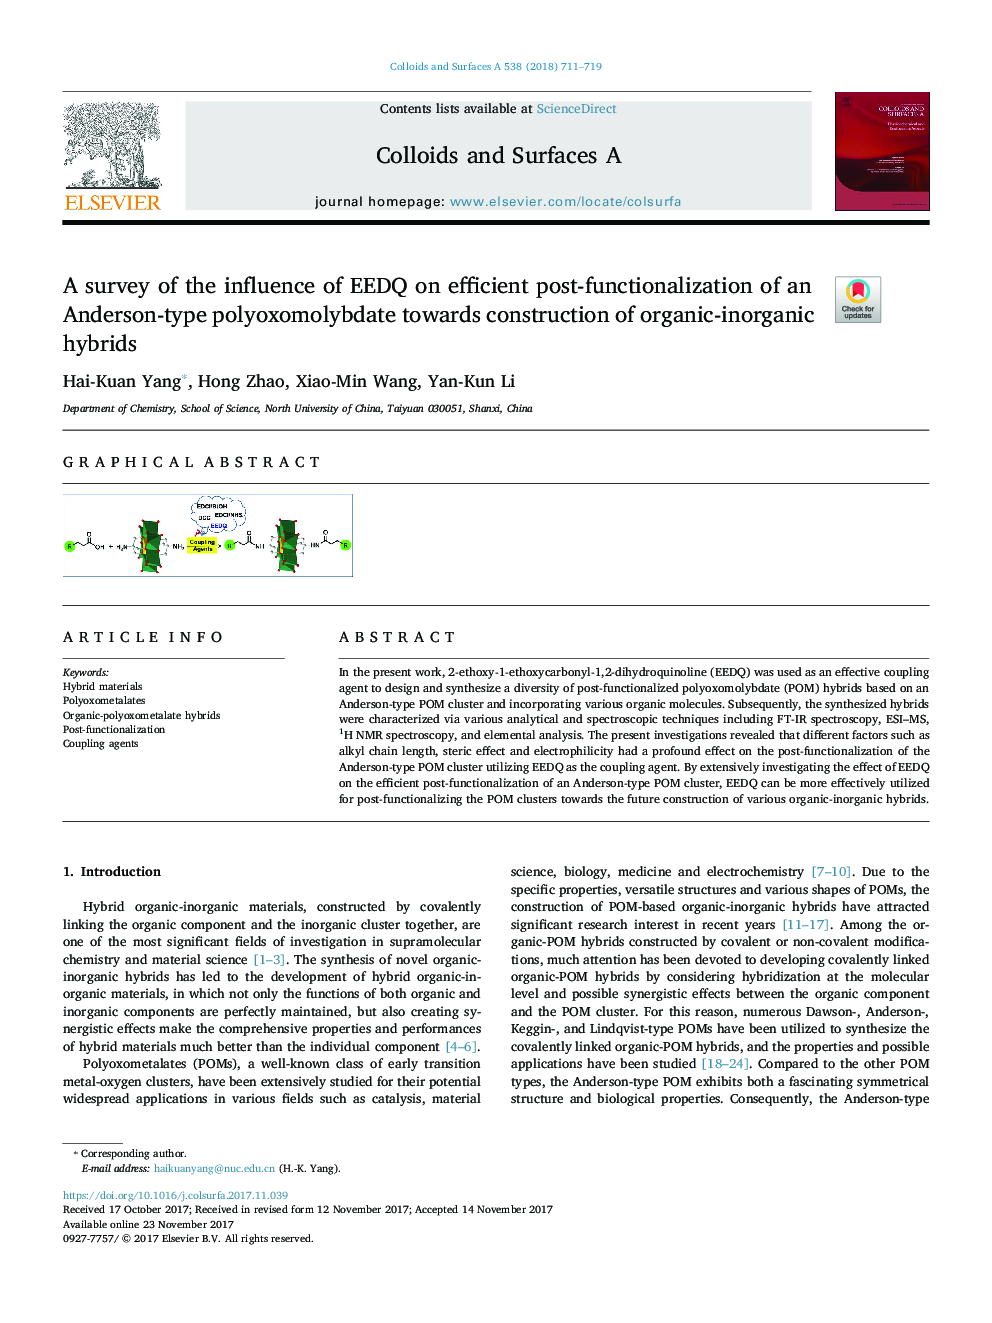 A survey of the influence of EEDQ on efficient post-functionalization of an Anderson-type polyoxomolybdate towards construction of organic-inorganic hybrids